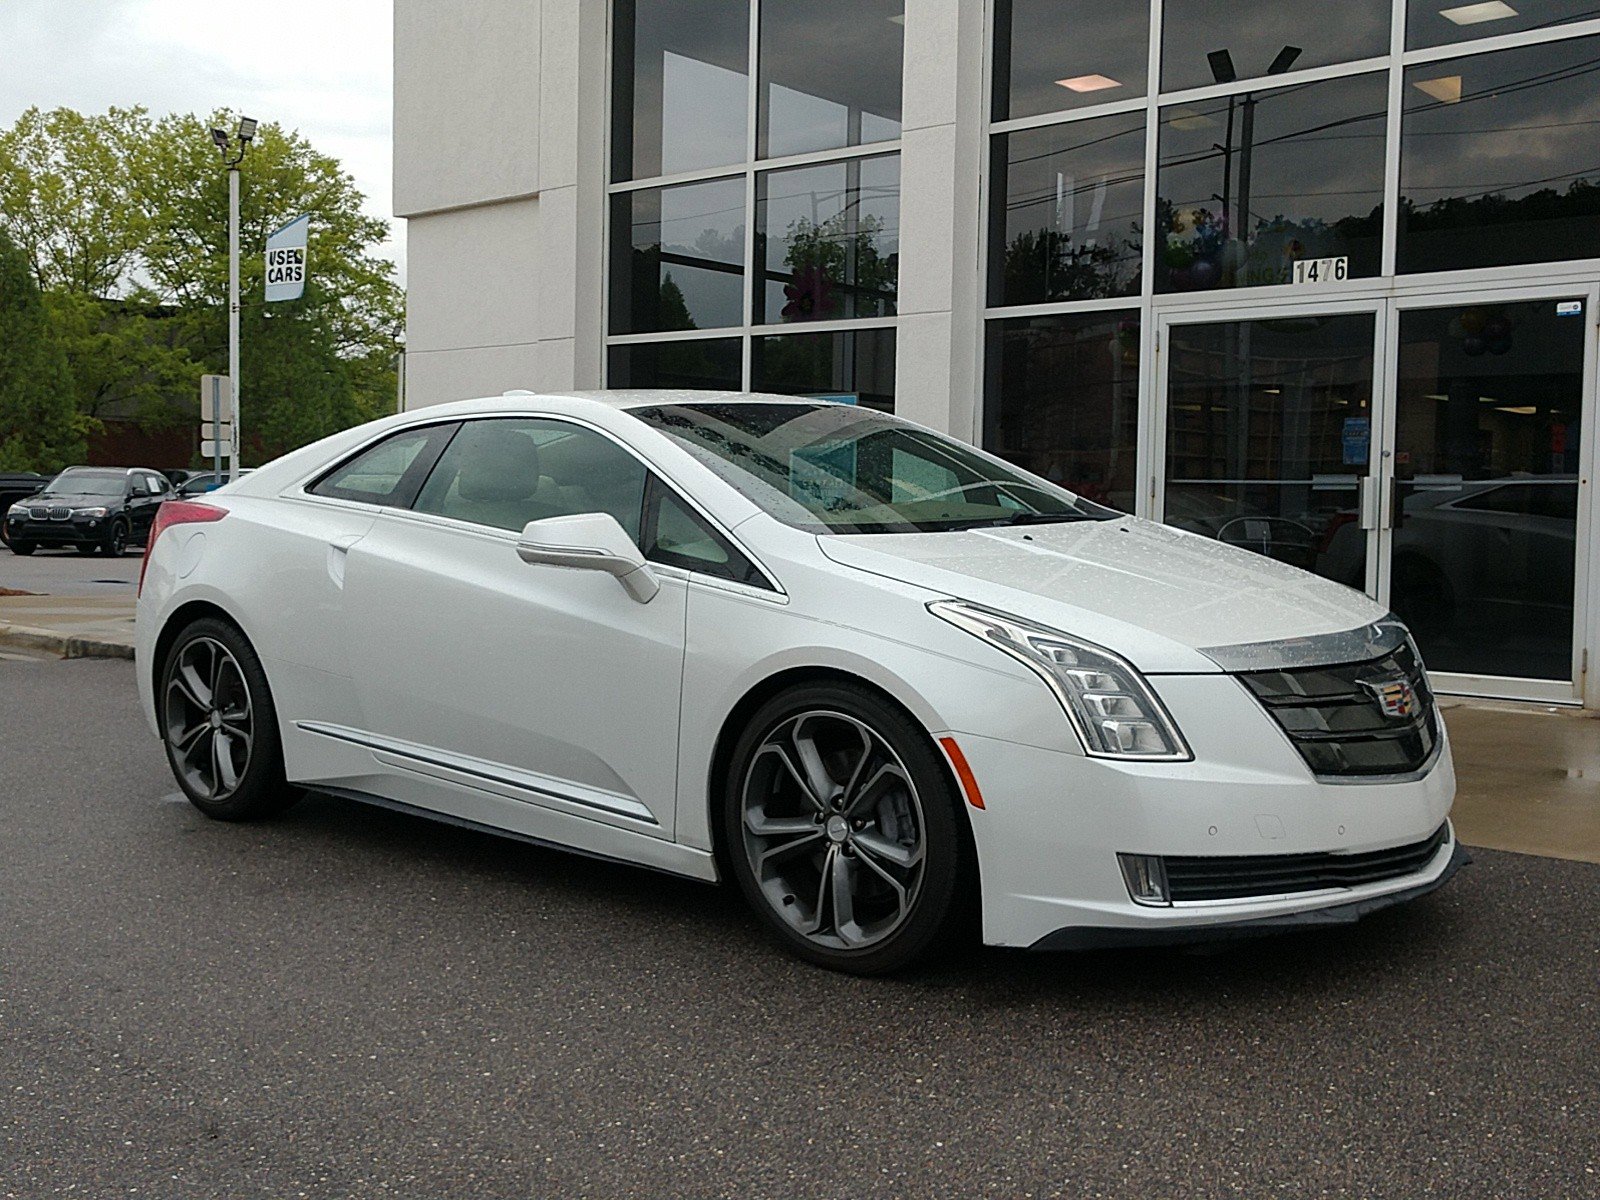 Used 2016 Cadillac ELR for Sale Right Now - Autotrader